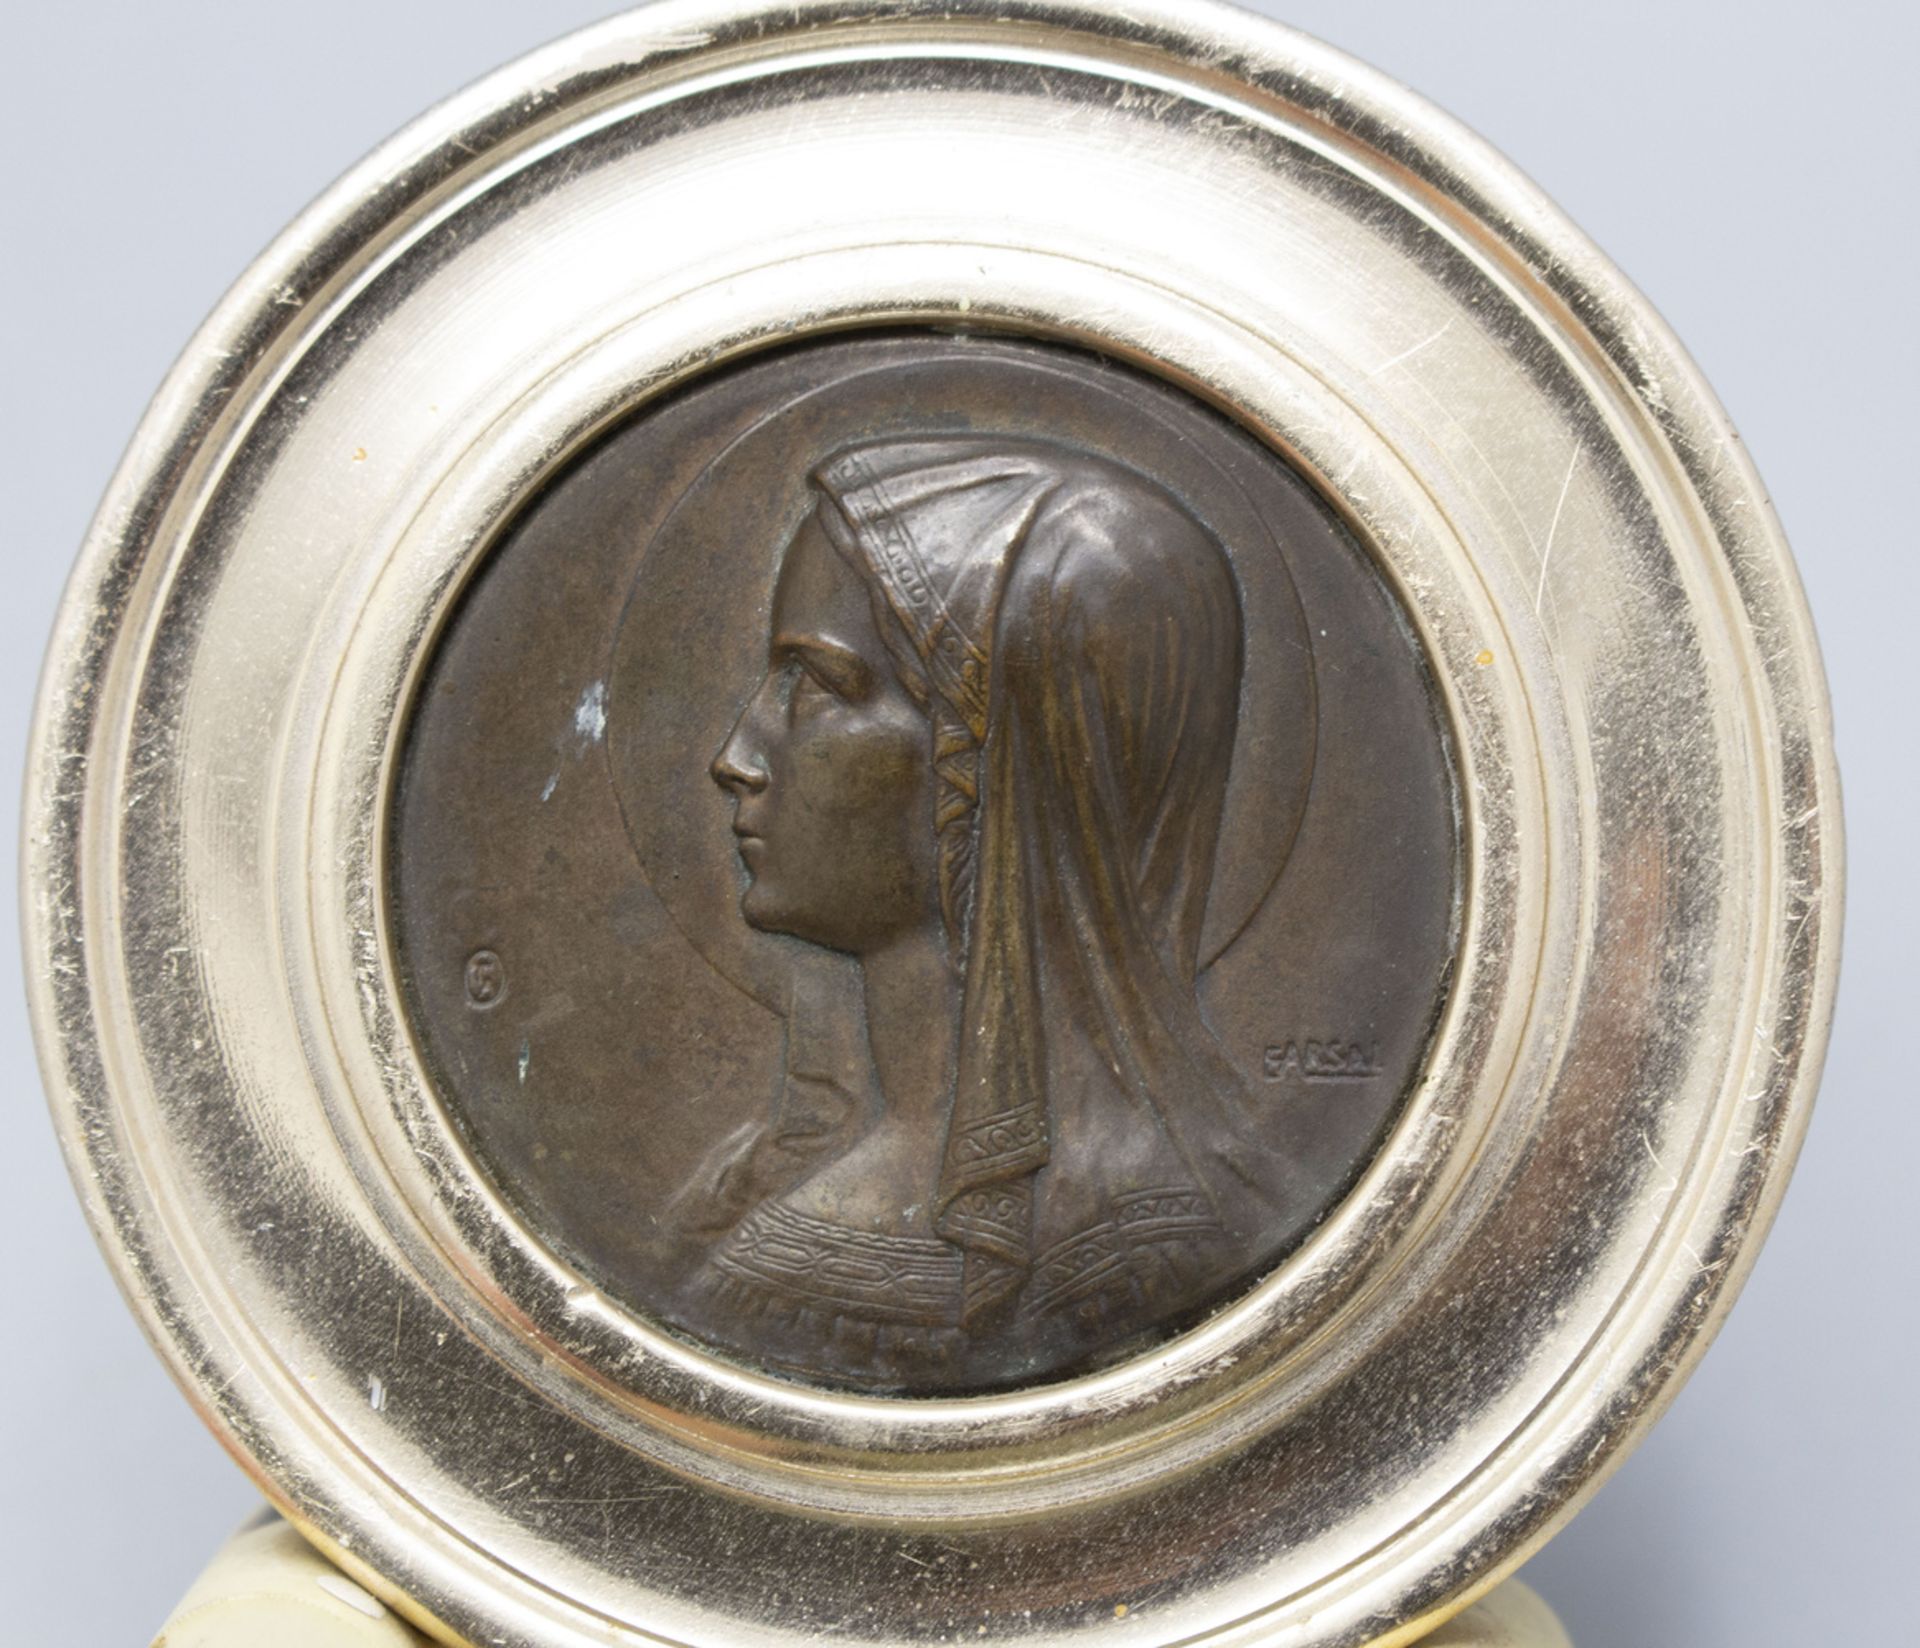 Marien-Medaillon auf Sockel / A medallion of Mary on a stand, 20. Jh. - Image 3 of 5